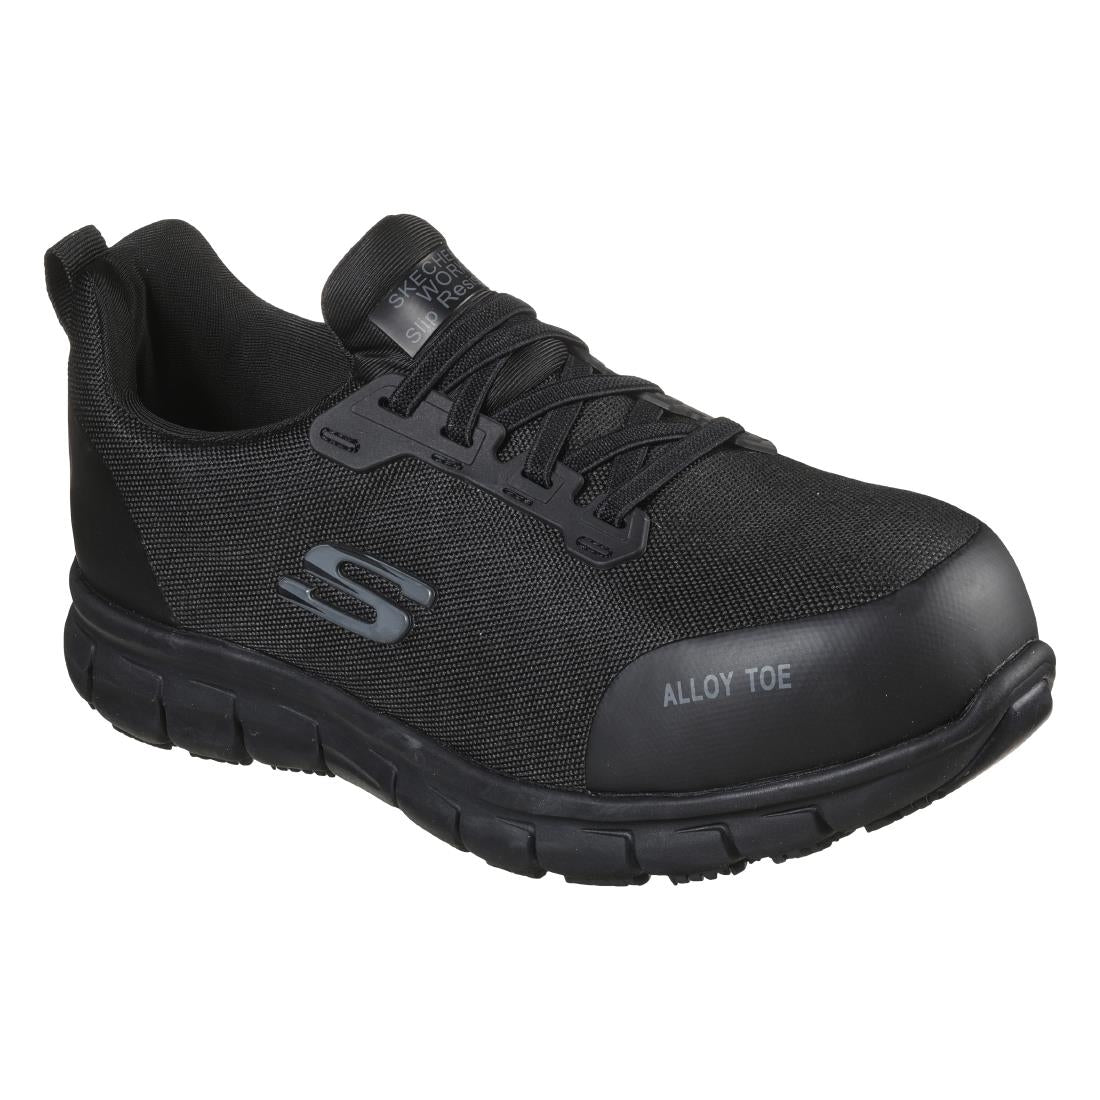 BB670-37 Skechers Womens Safety Shoe with Steel Toe Cap - Size 37 (UK 4) JD Catering Equipment Solutions Ltd